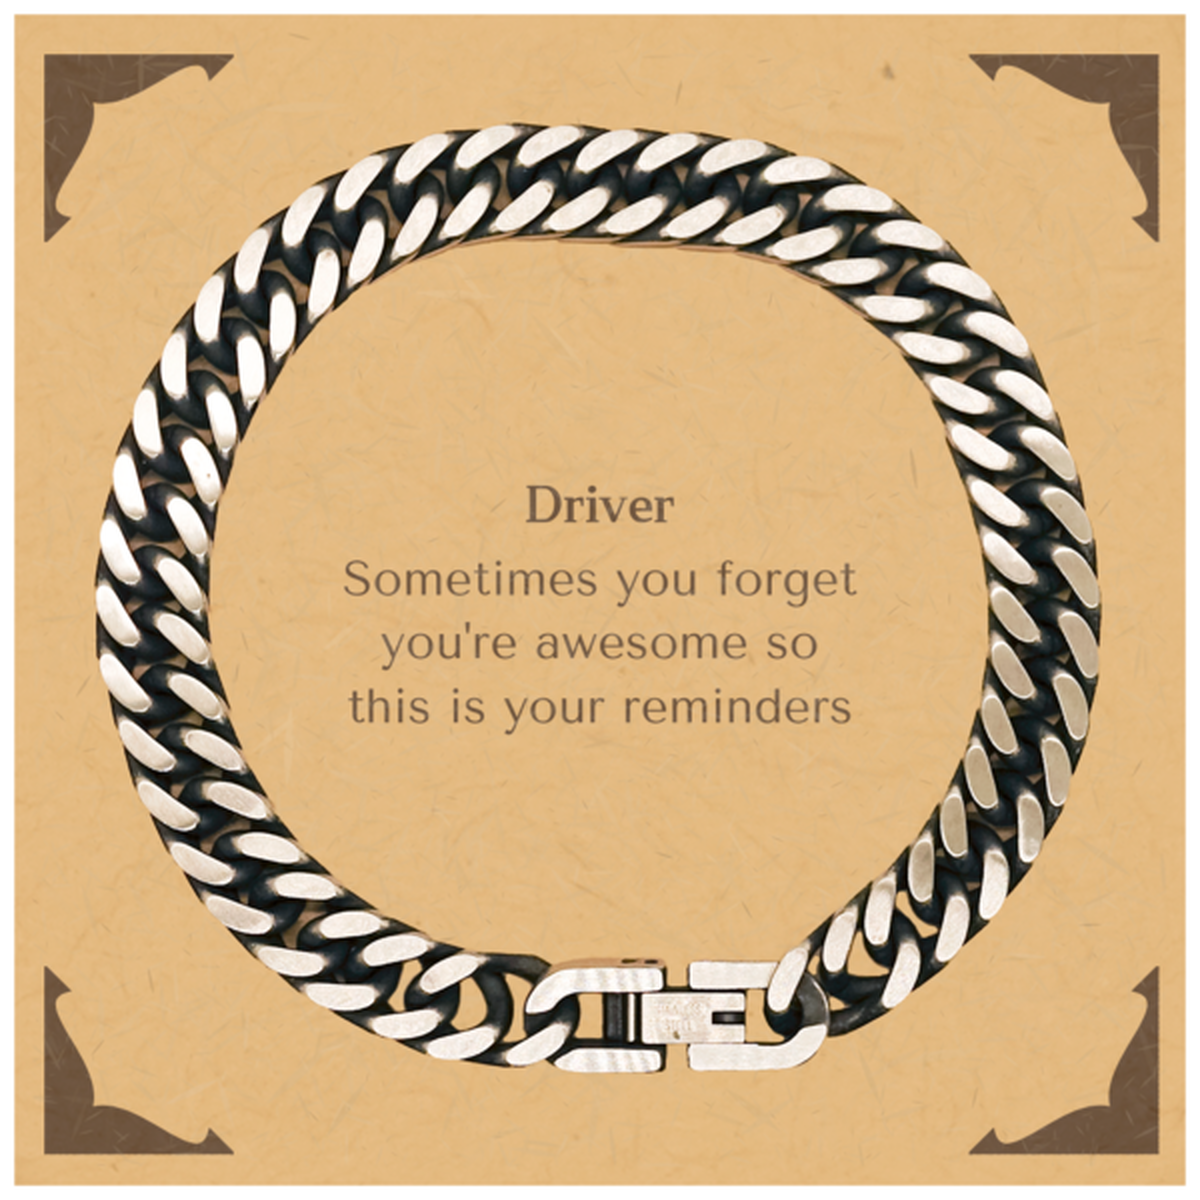 Sentimental Driver Cuban Link Chain Bracelet, Driver Sometimes you forget you're awesome so this is your reminders, Graduation Christmas Birthday Gifts for Driver, Men, Women, Coworkers